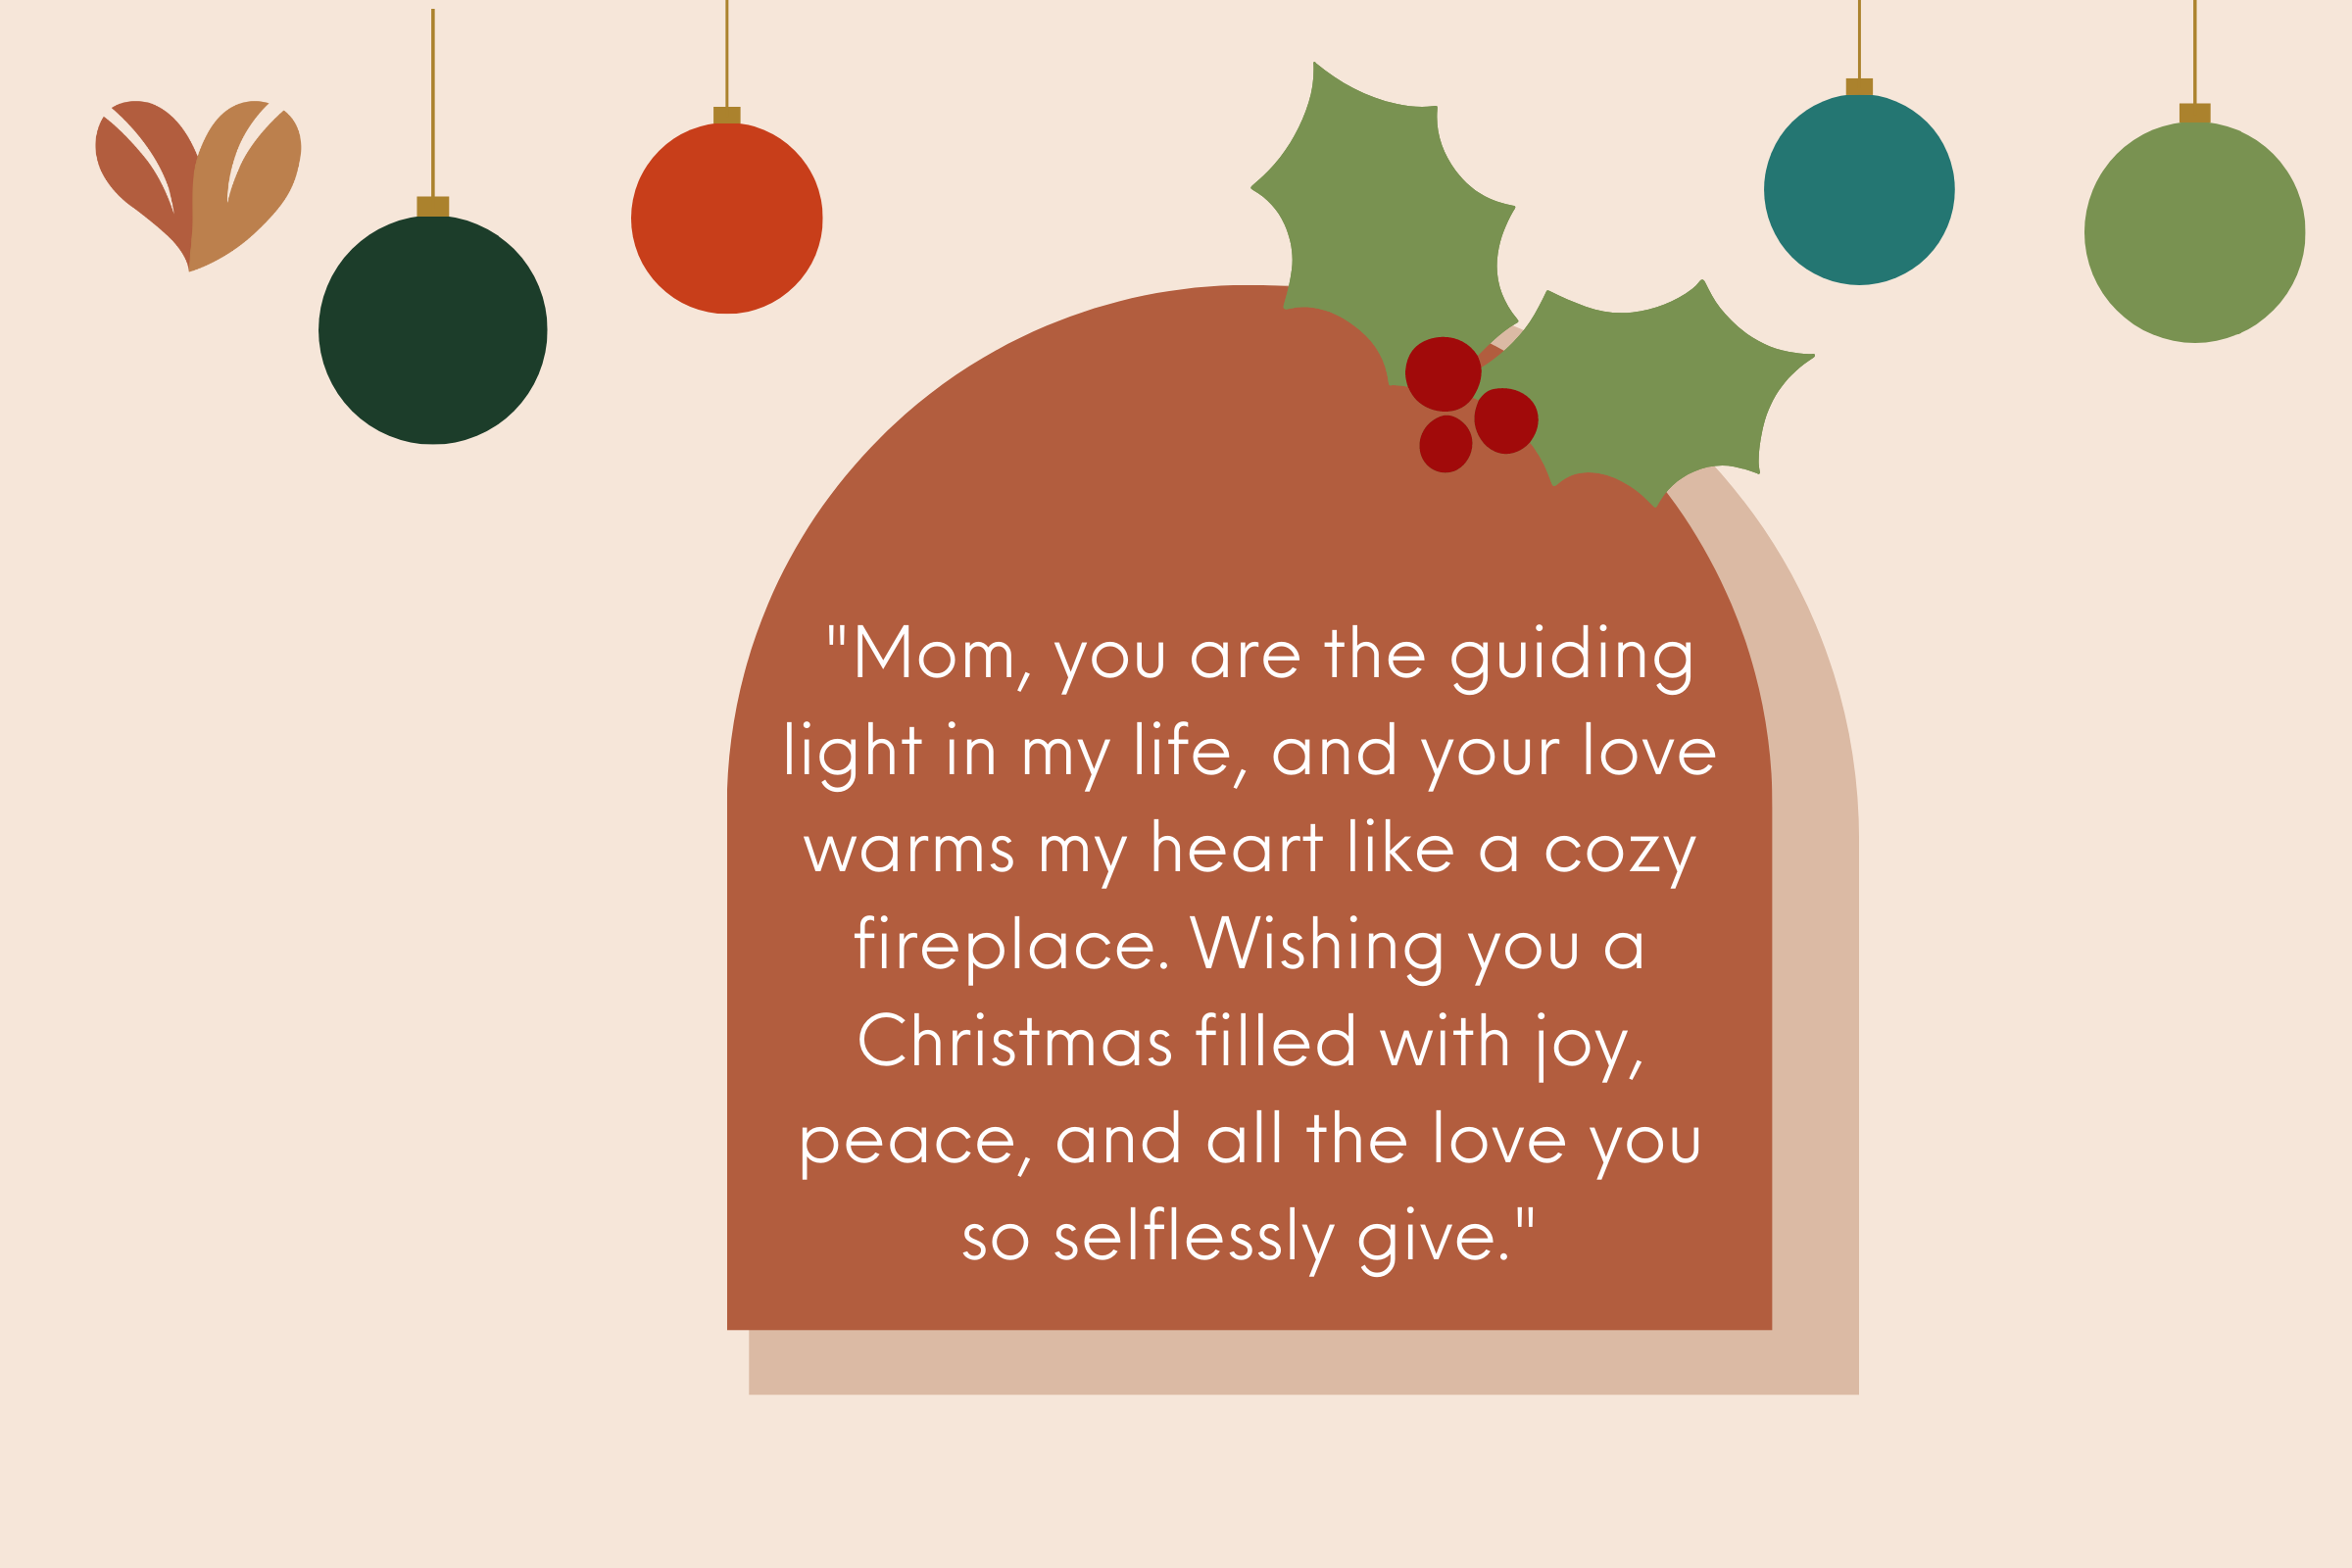 Touching messages to send on Christmas Eve